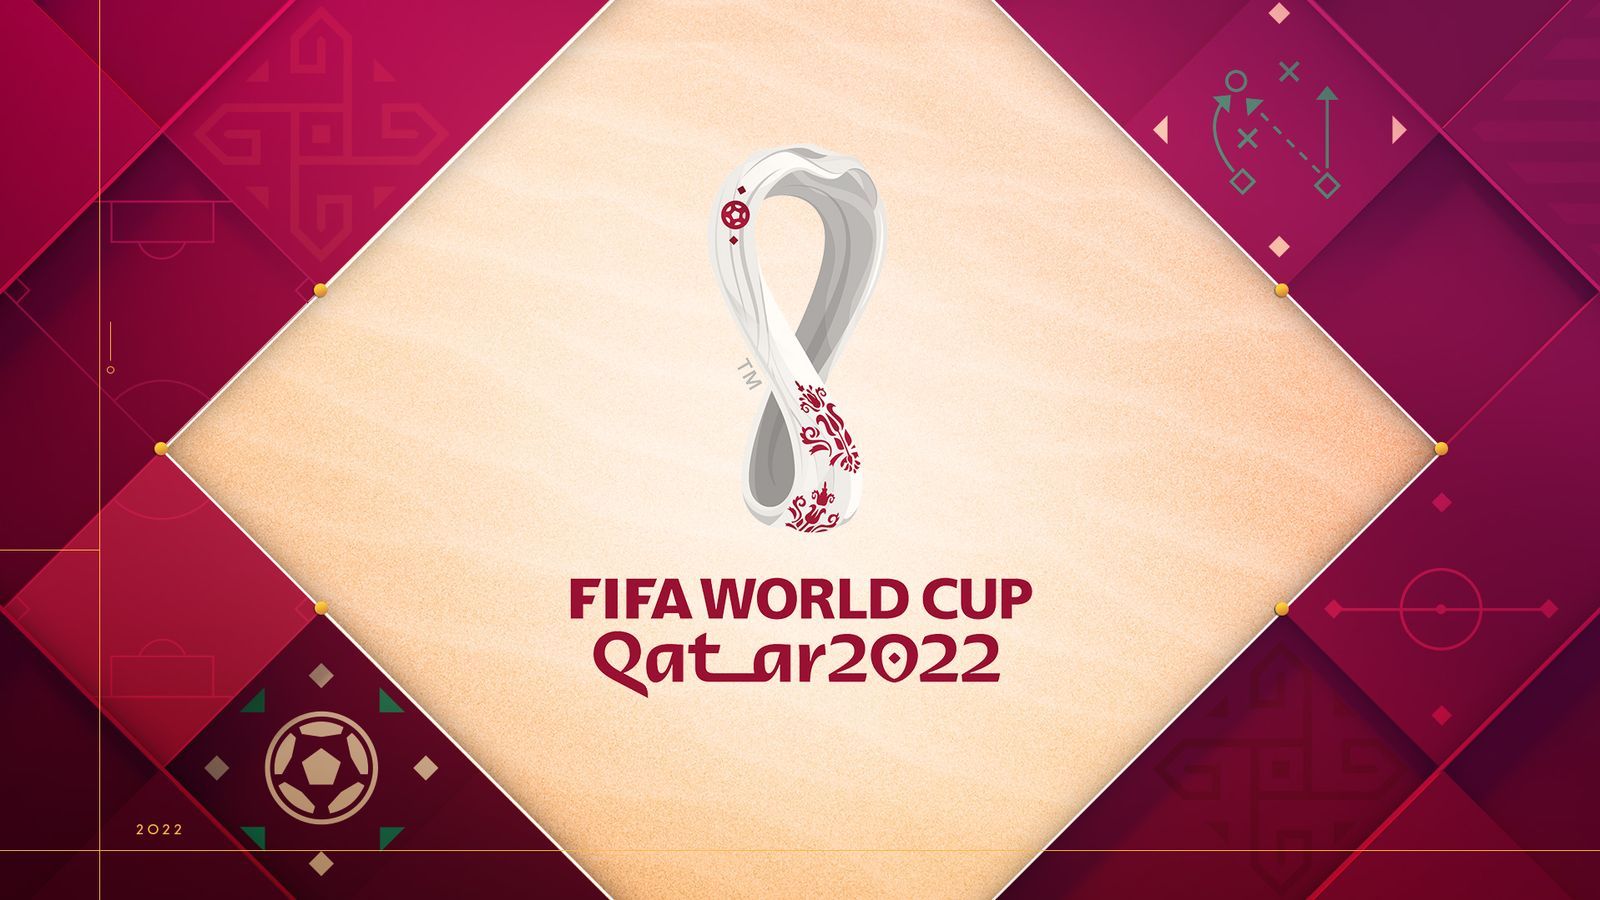 2022 FIFA World Cup Full match schedule, opening ceremony, highlights